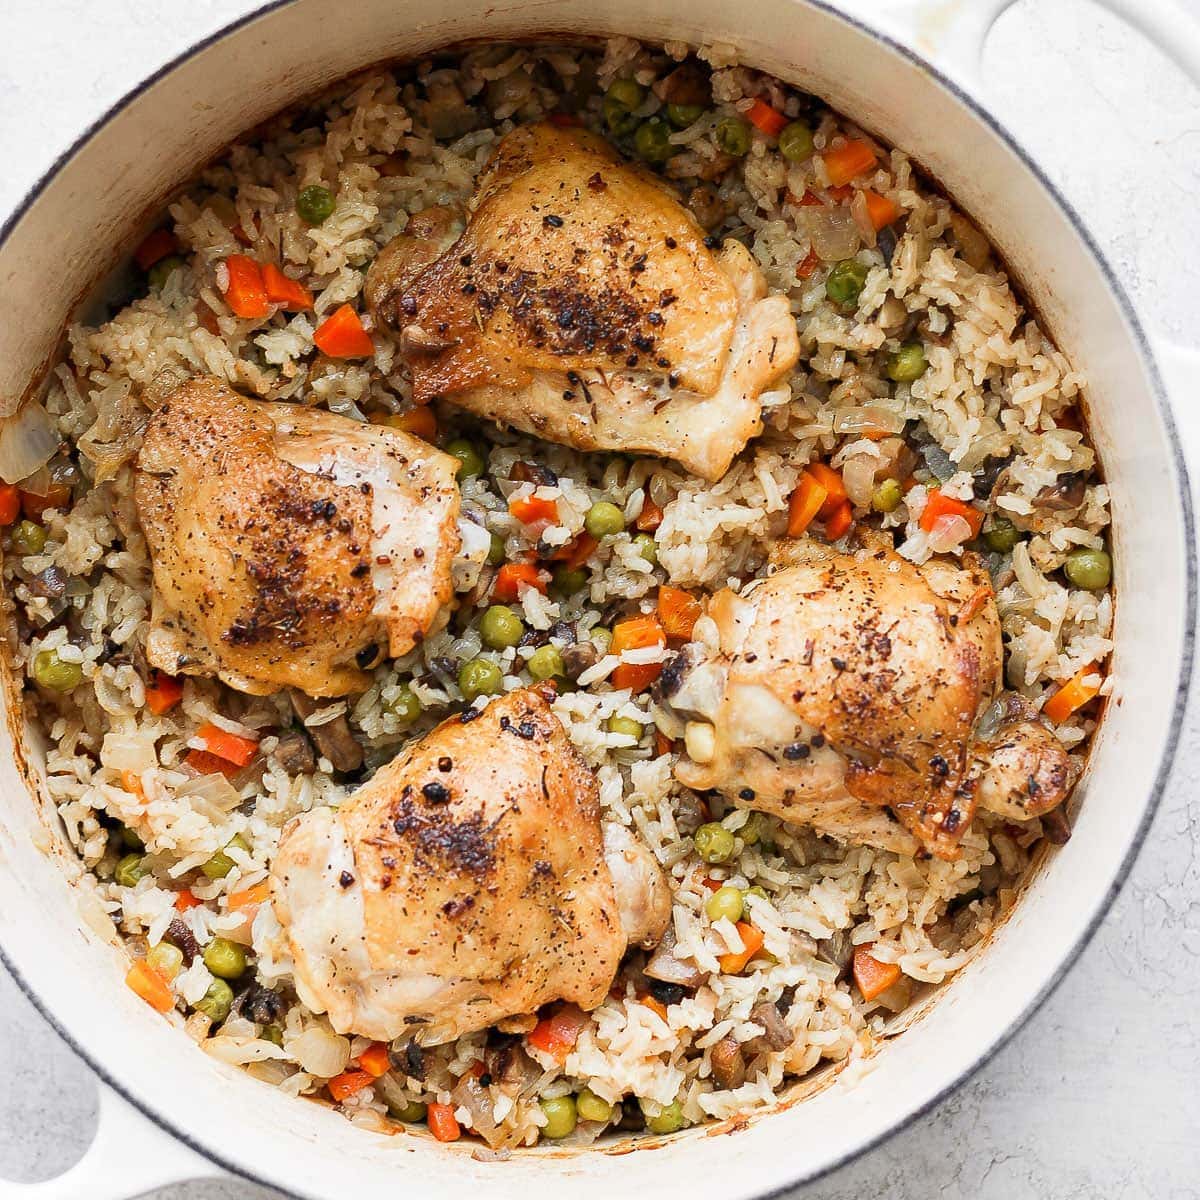 https://fitfoodiefinds.com/wp-content/uploads/2020/12/chicken-and-rice-5-1.jpg